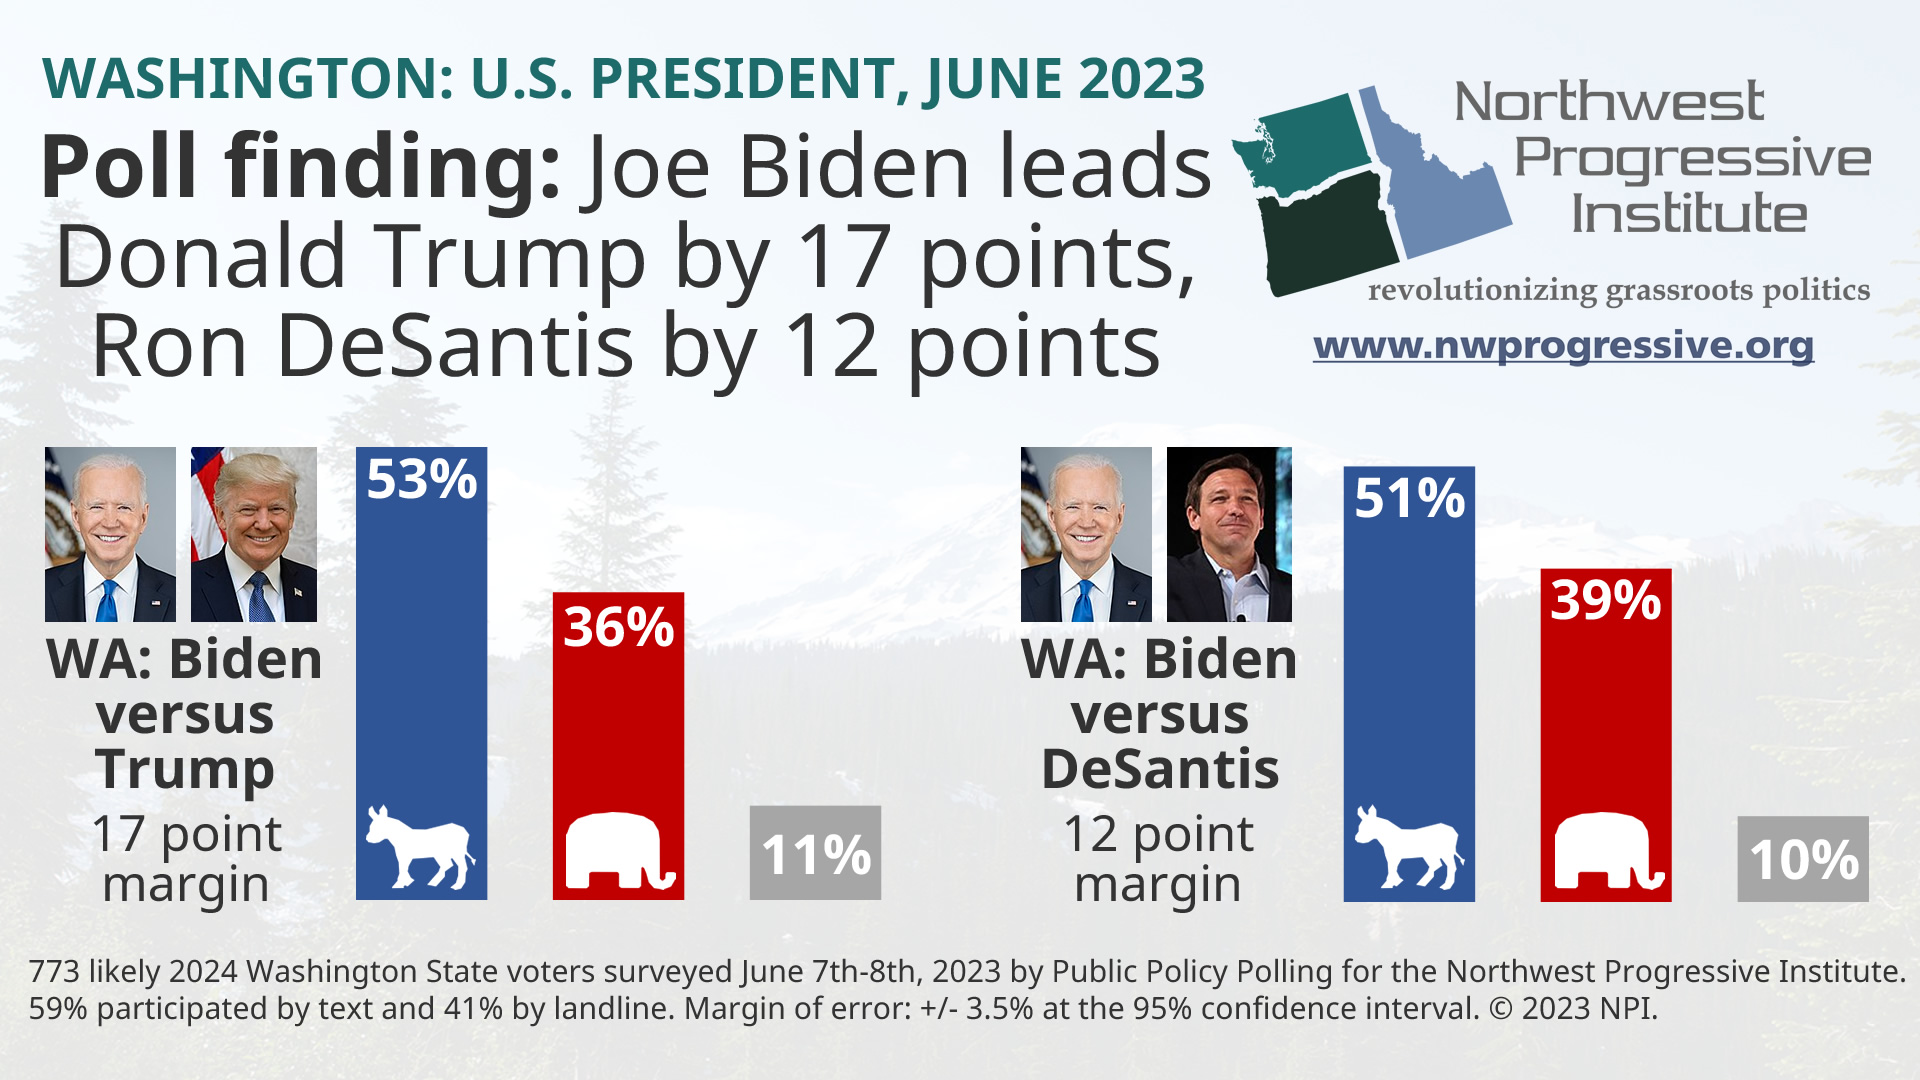 NPI poll finding: Two possible 2024 presidential matchups in Washington State as of June 2023